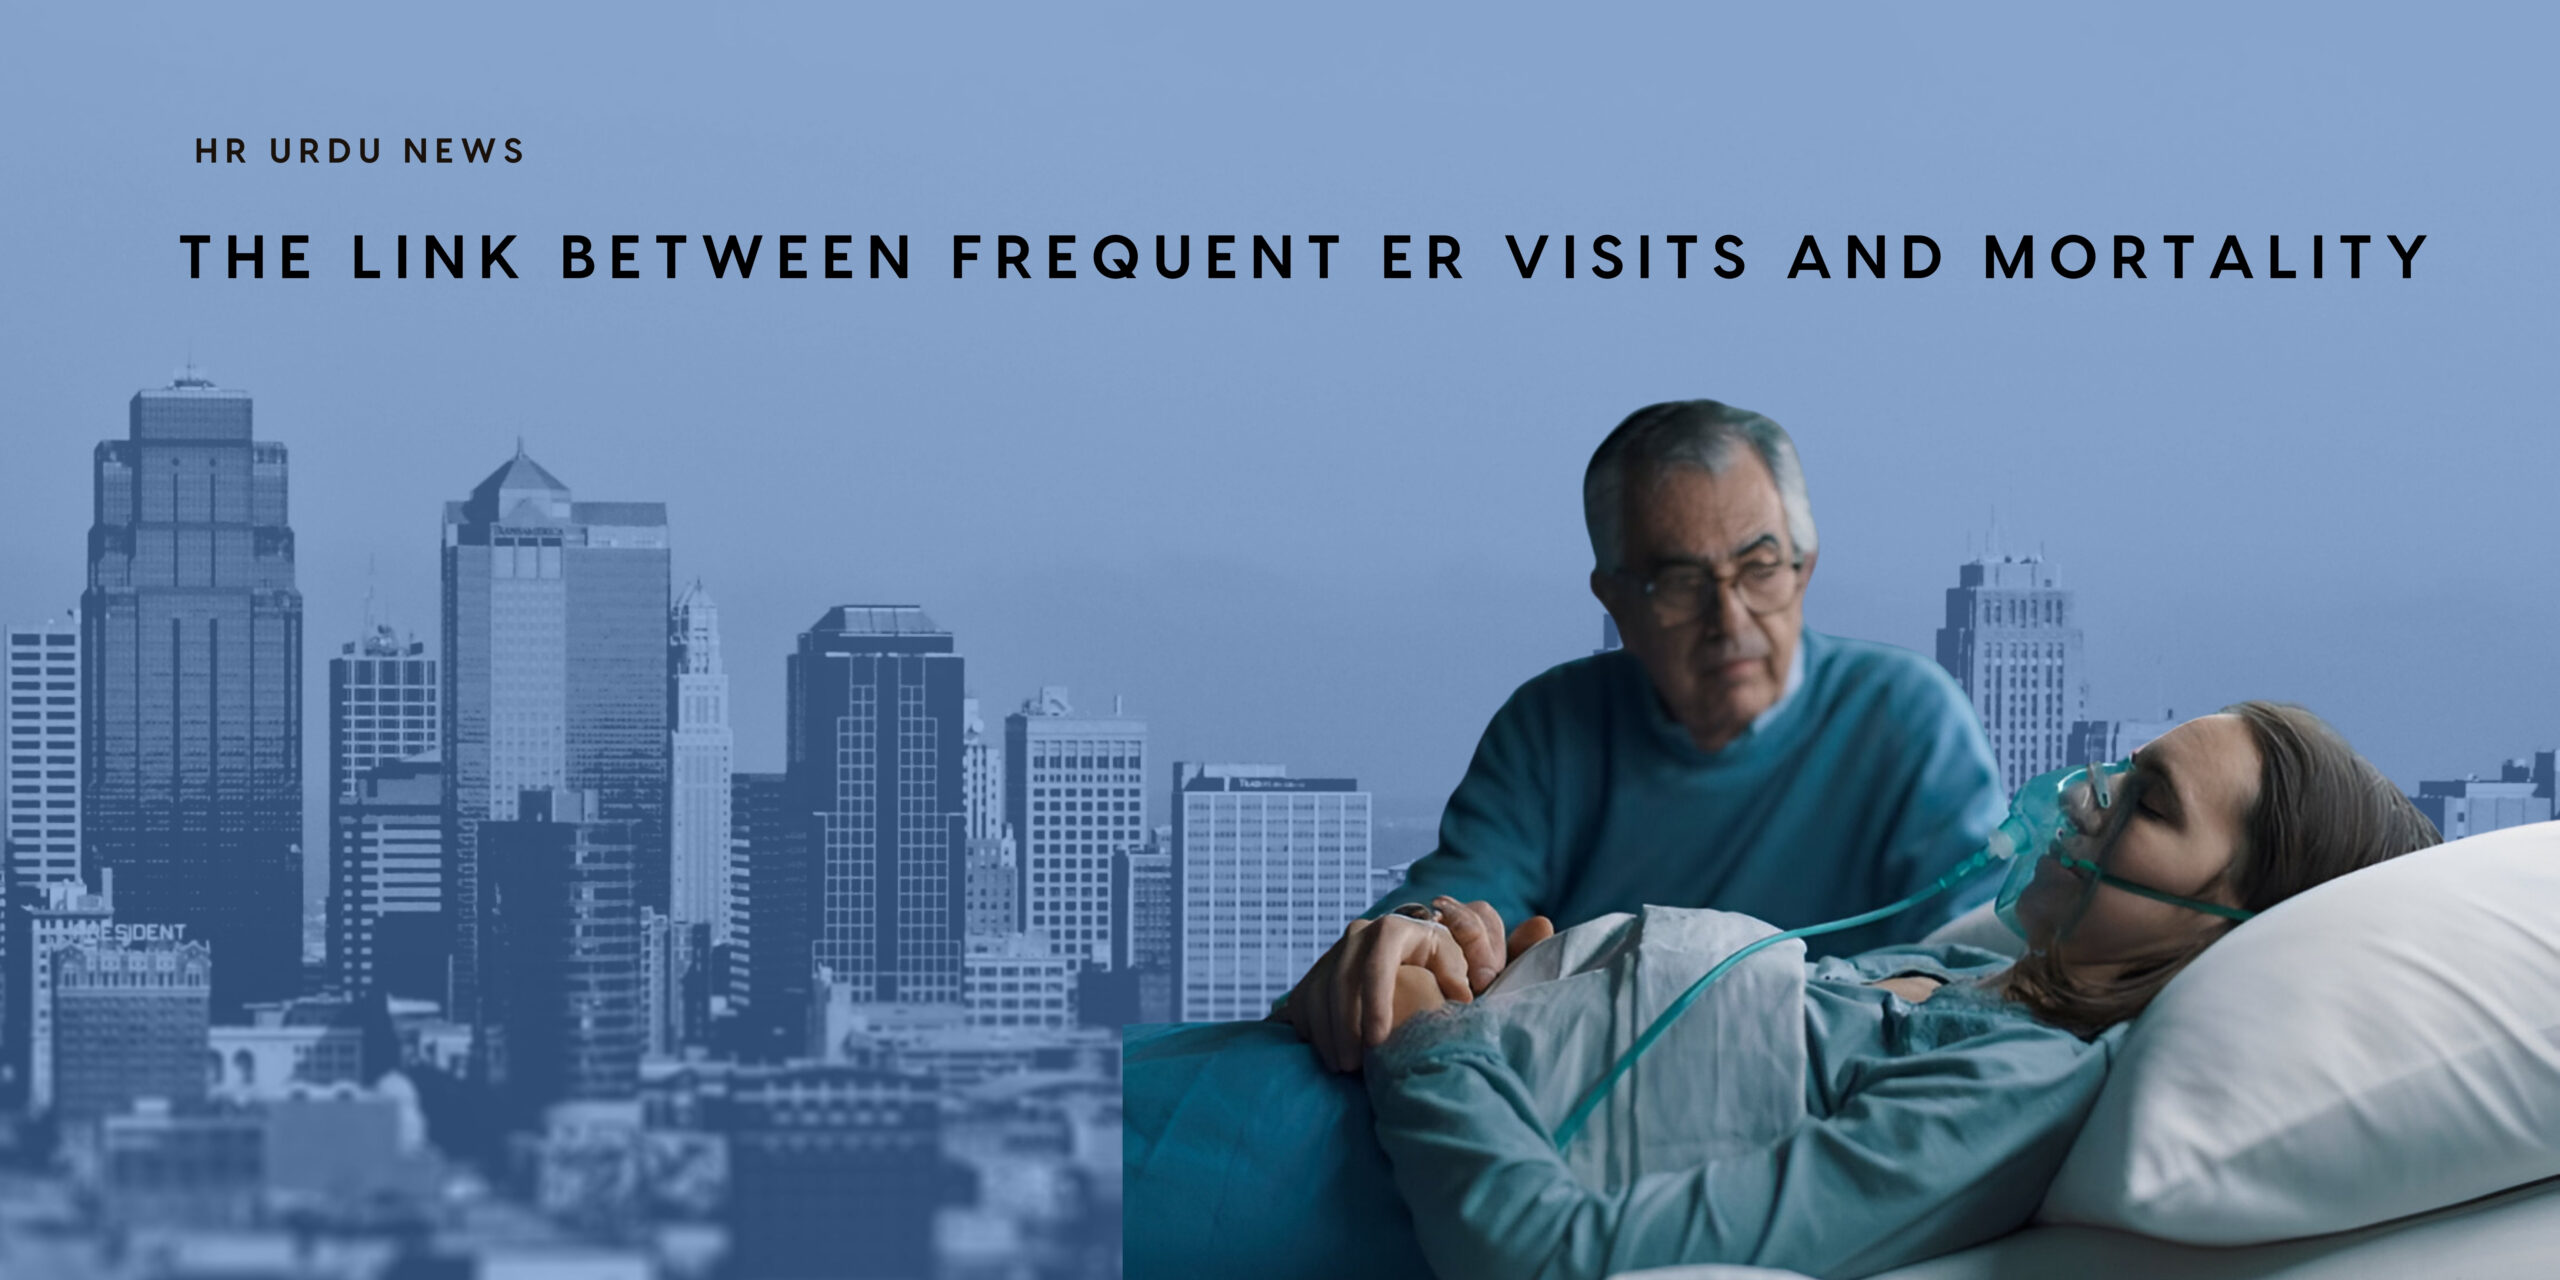 The Link Between Frequent ER Visits and Mortality